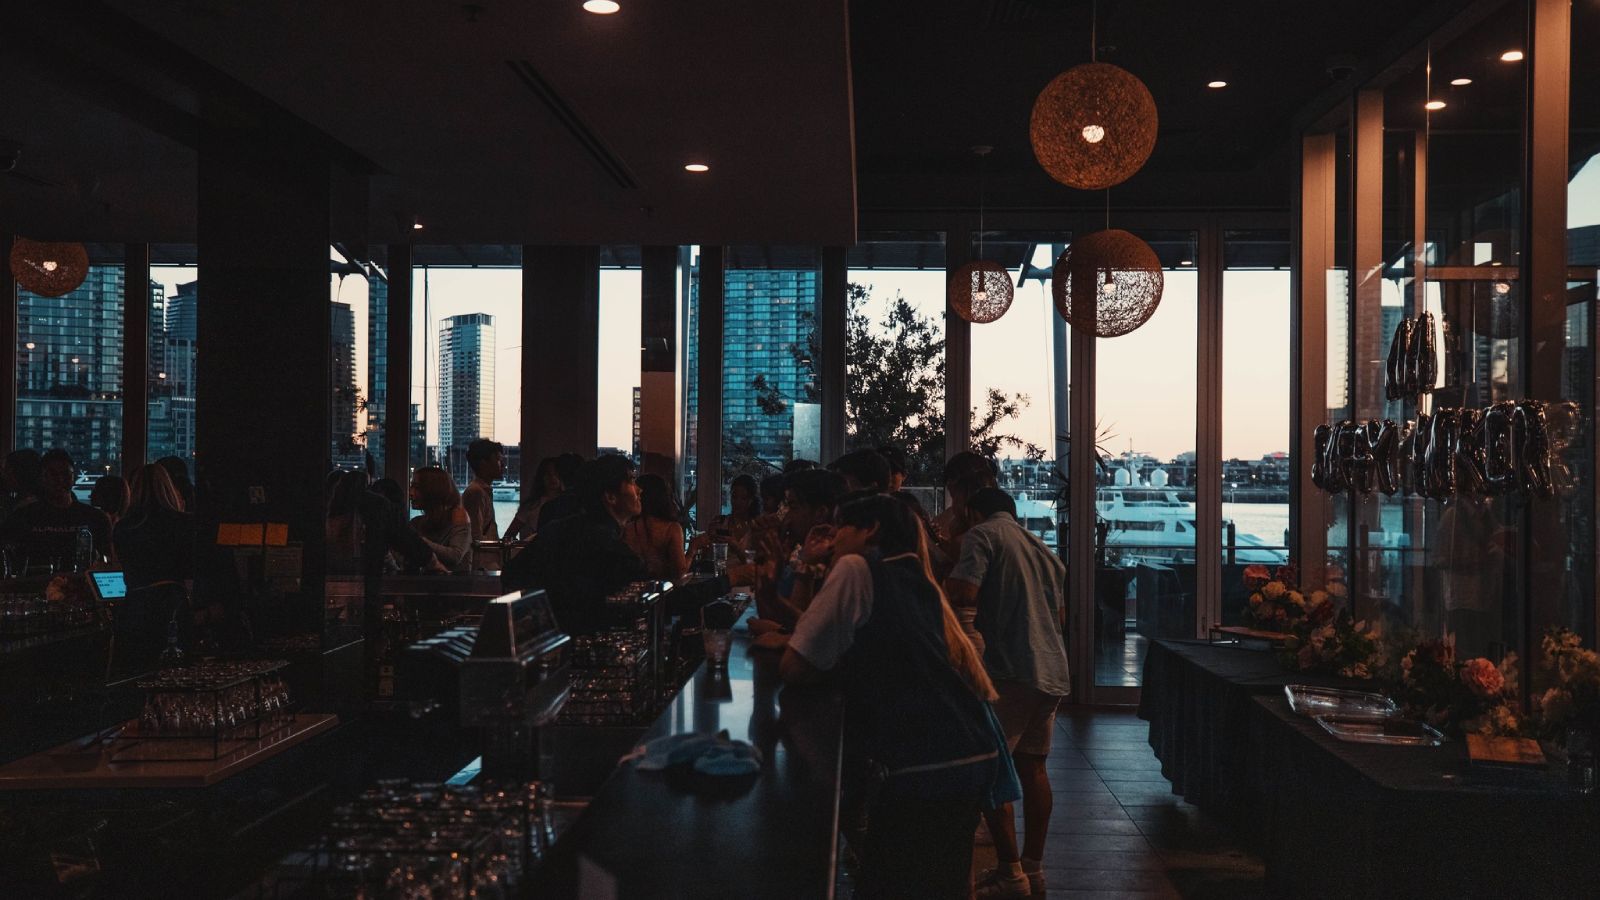 People enjoying drinks and conversation at a lively bar in The Promenade Docklands Waterfront Room.